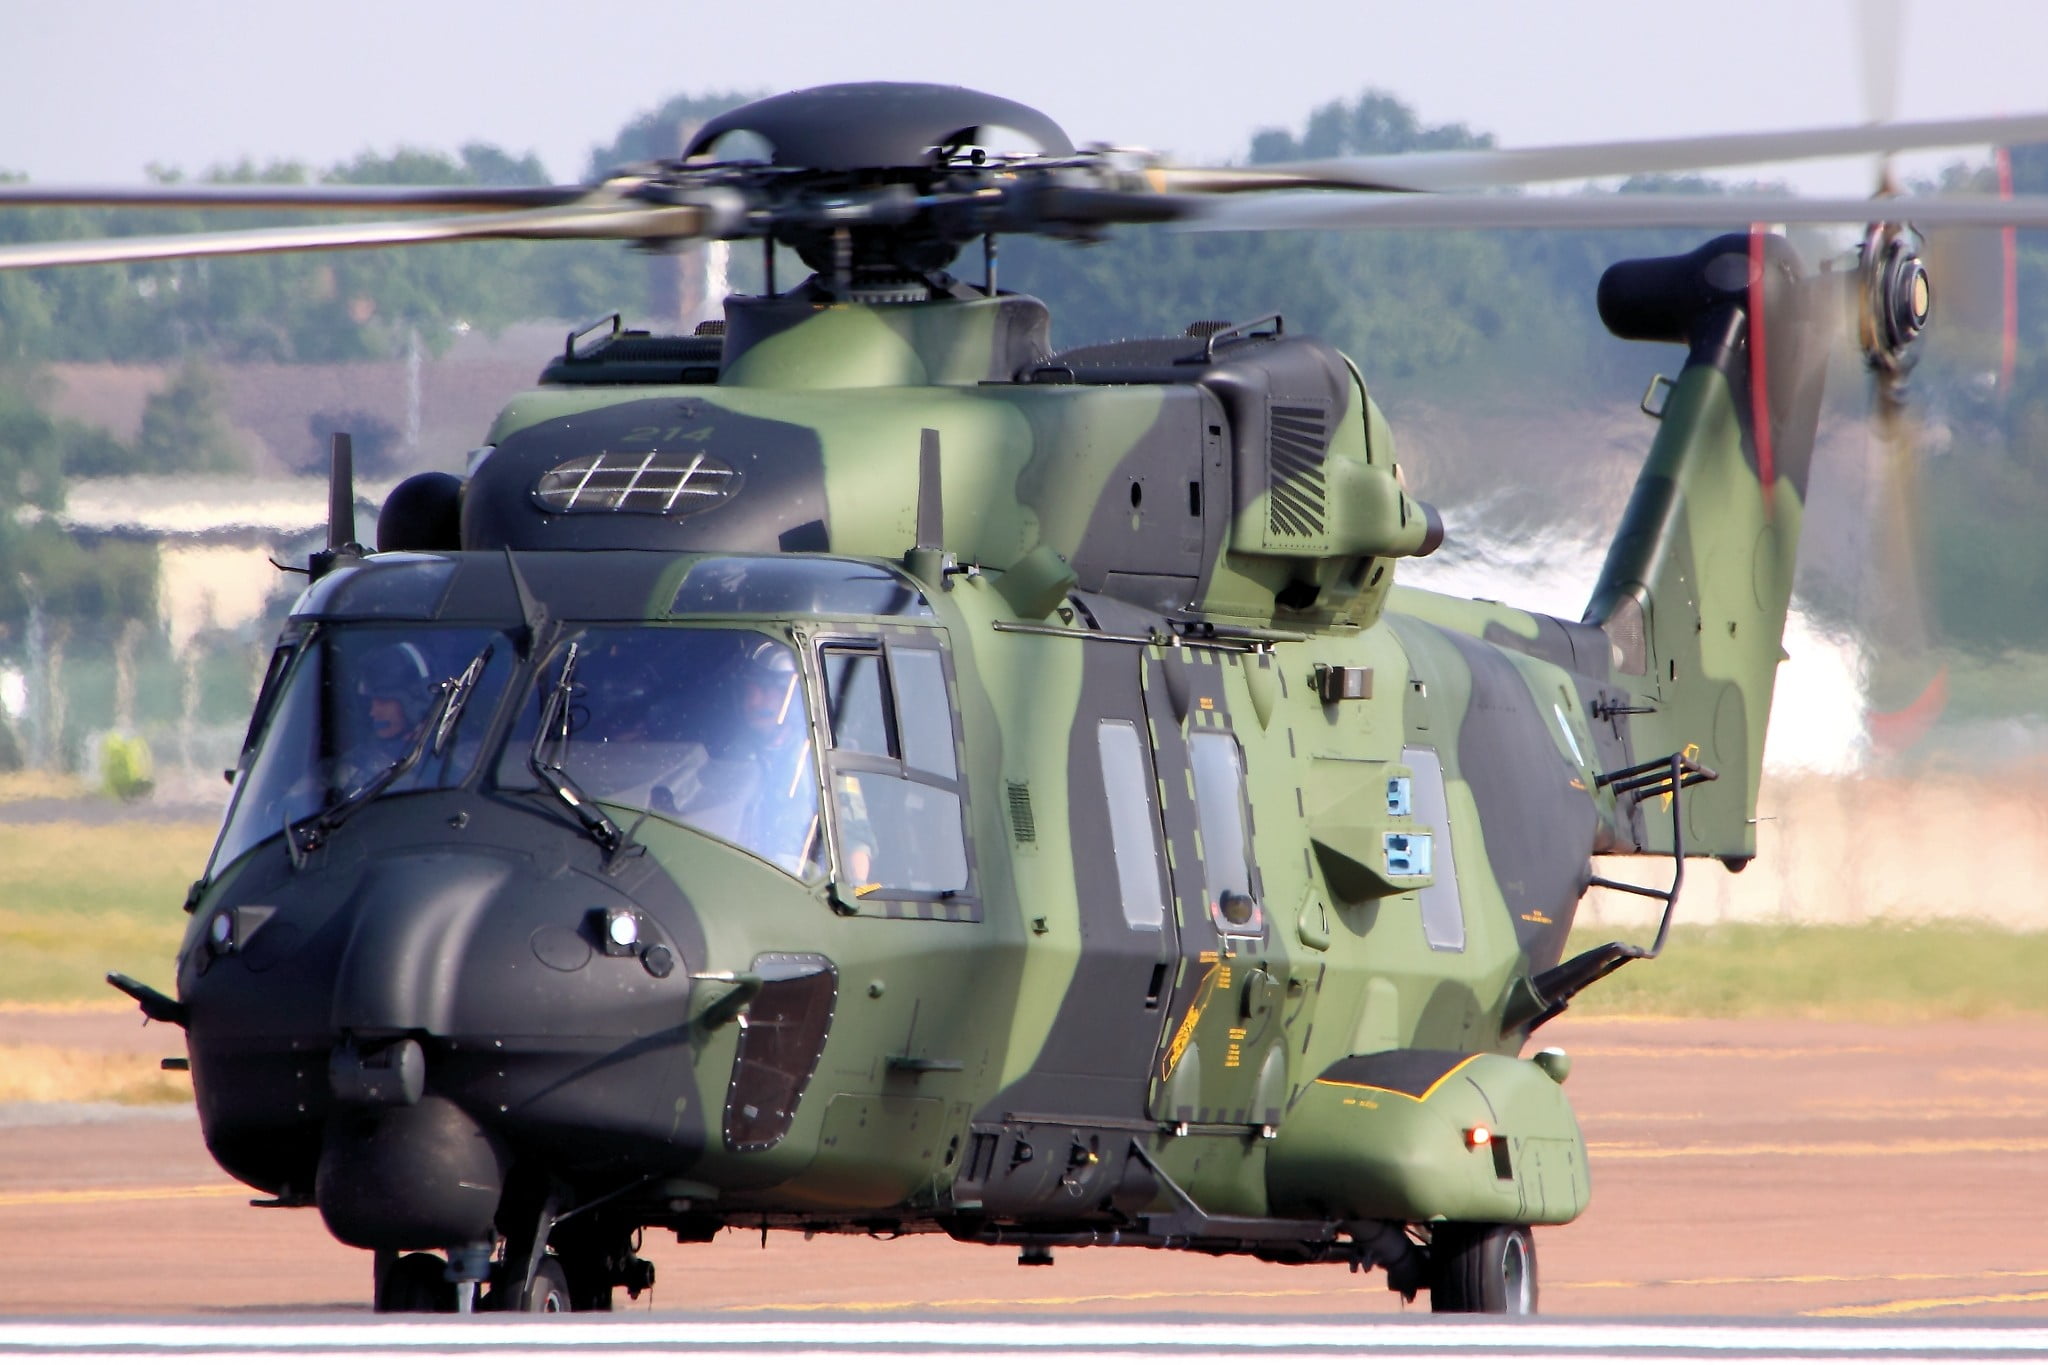 green and black camouflage helicopter, helicopters, NHIndustries NH90, aircraft, military aircraft